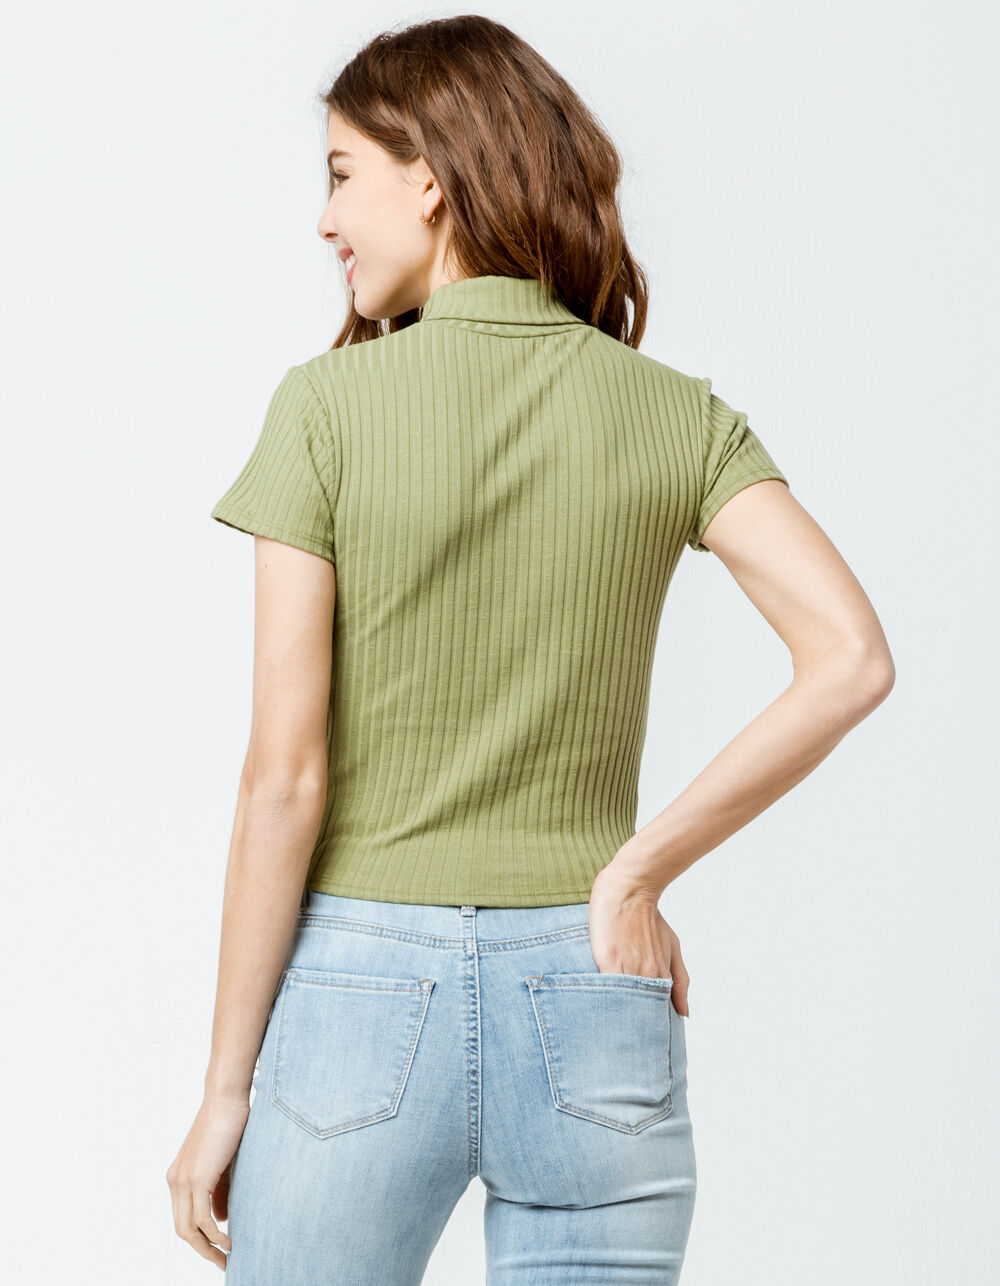 SKY AND SPARROW Solid Turtleneck Olive Womens Tee image number 2